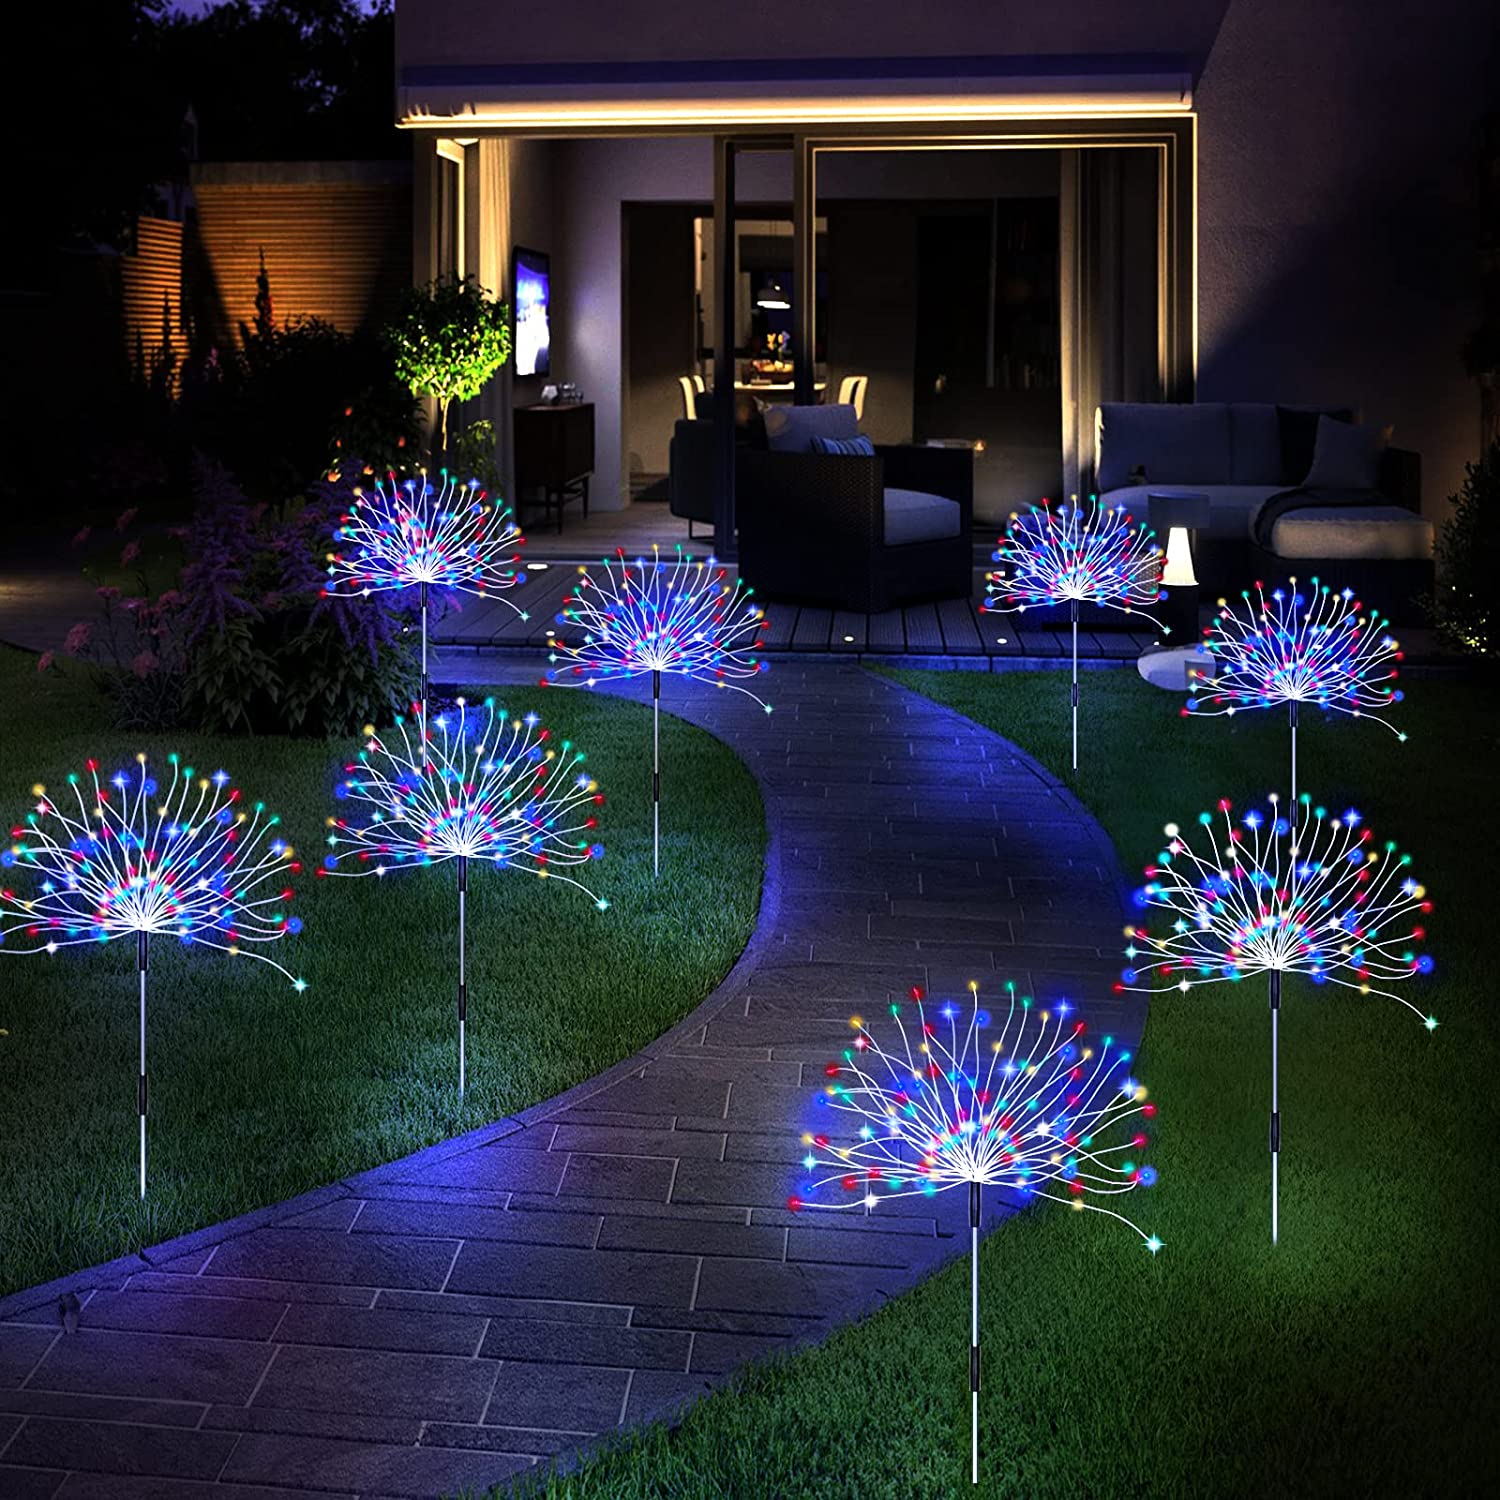 LED-Flood-Street-Lights-Solar-Garden-Lights-Fireworks-Lights-Outdoor-Waterproof-120-LED-2-Lighting-Modes-Auto-On-Off-Solar-Outdoor-Lights-for-Pathway-Yard-Christmas-Party-etc-39